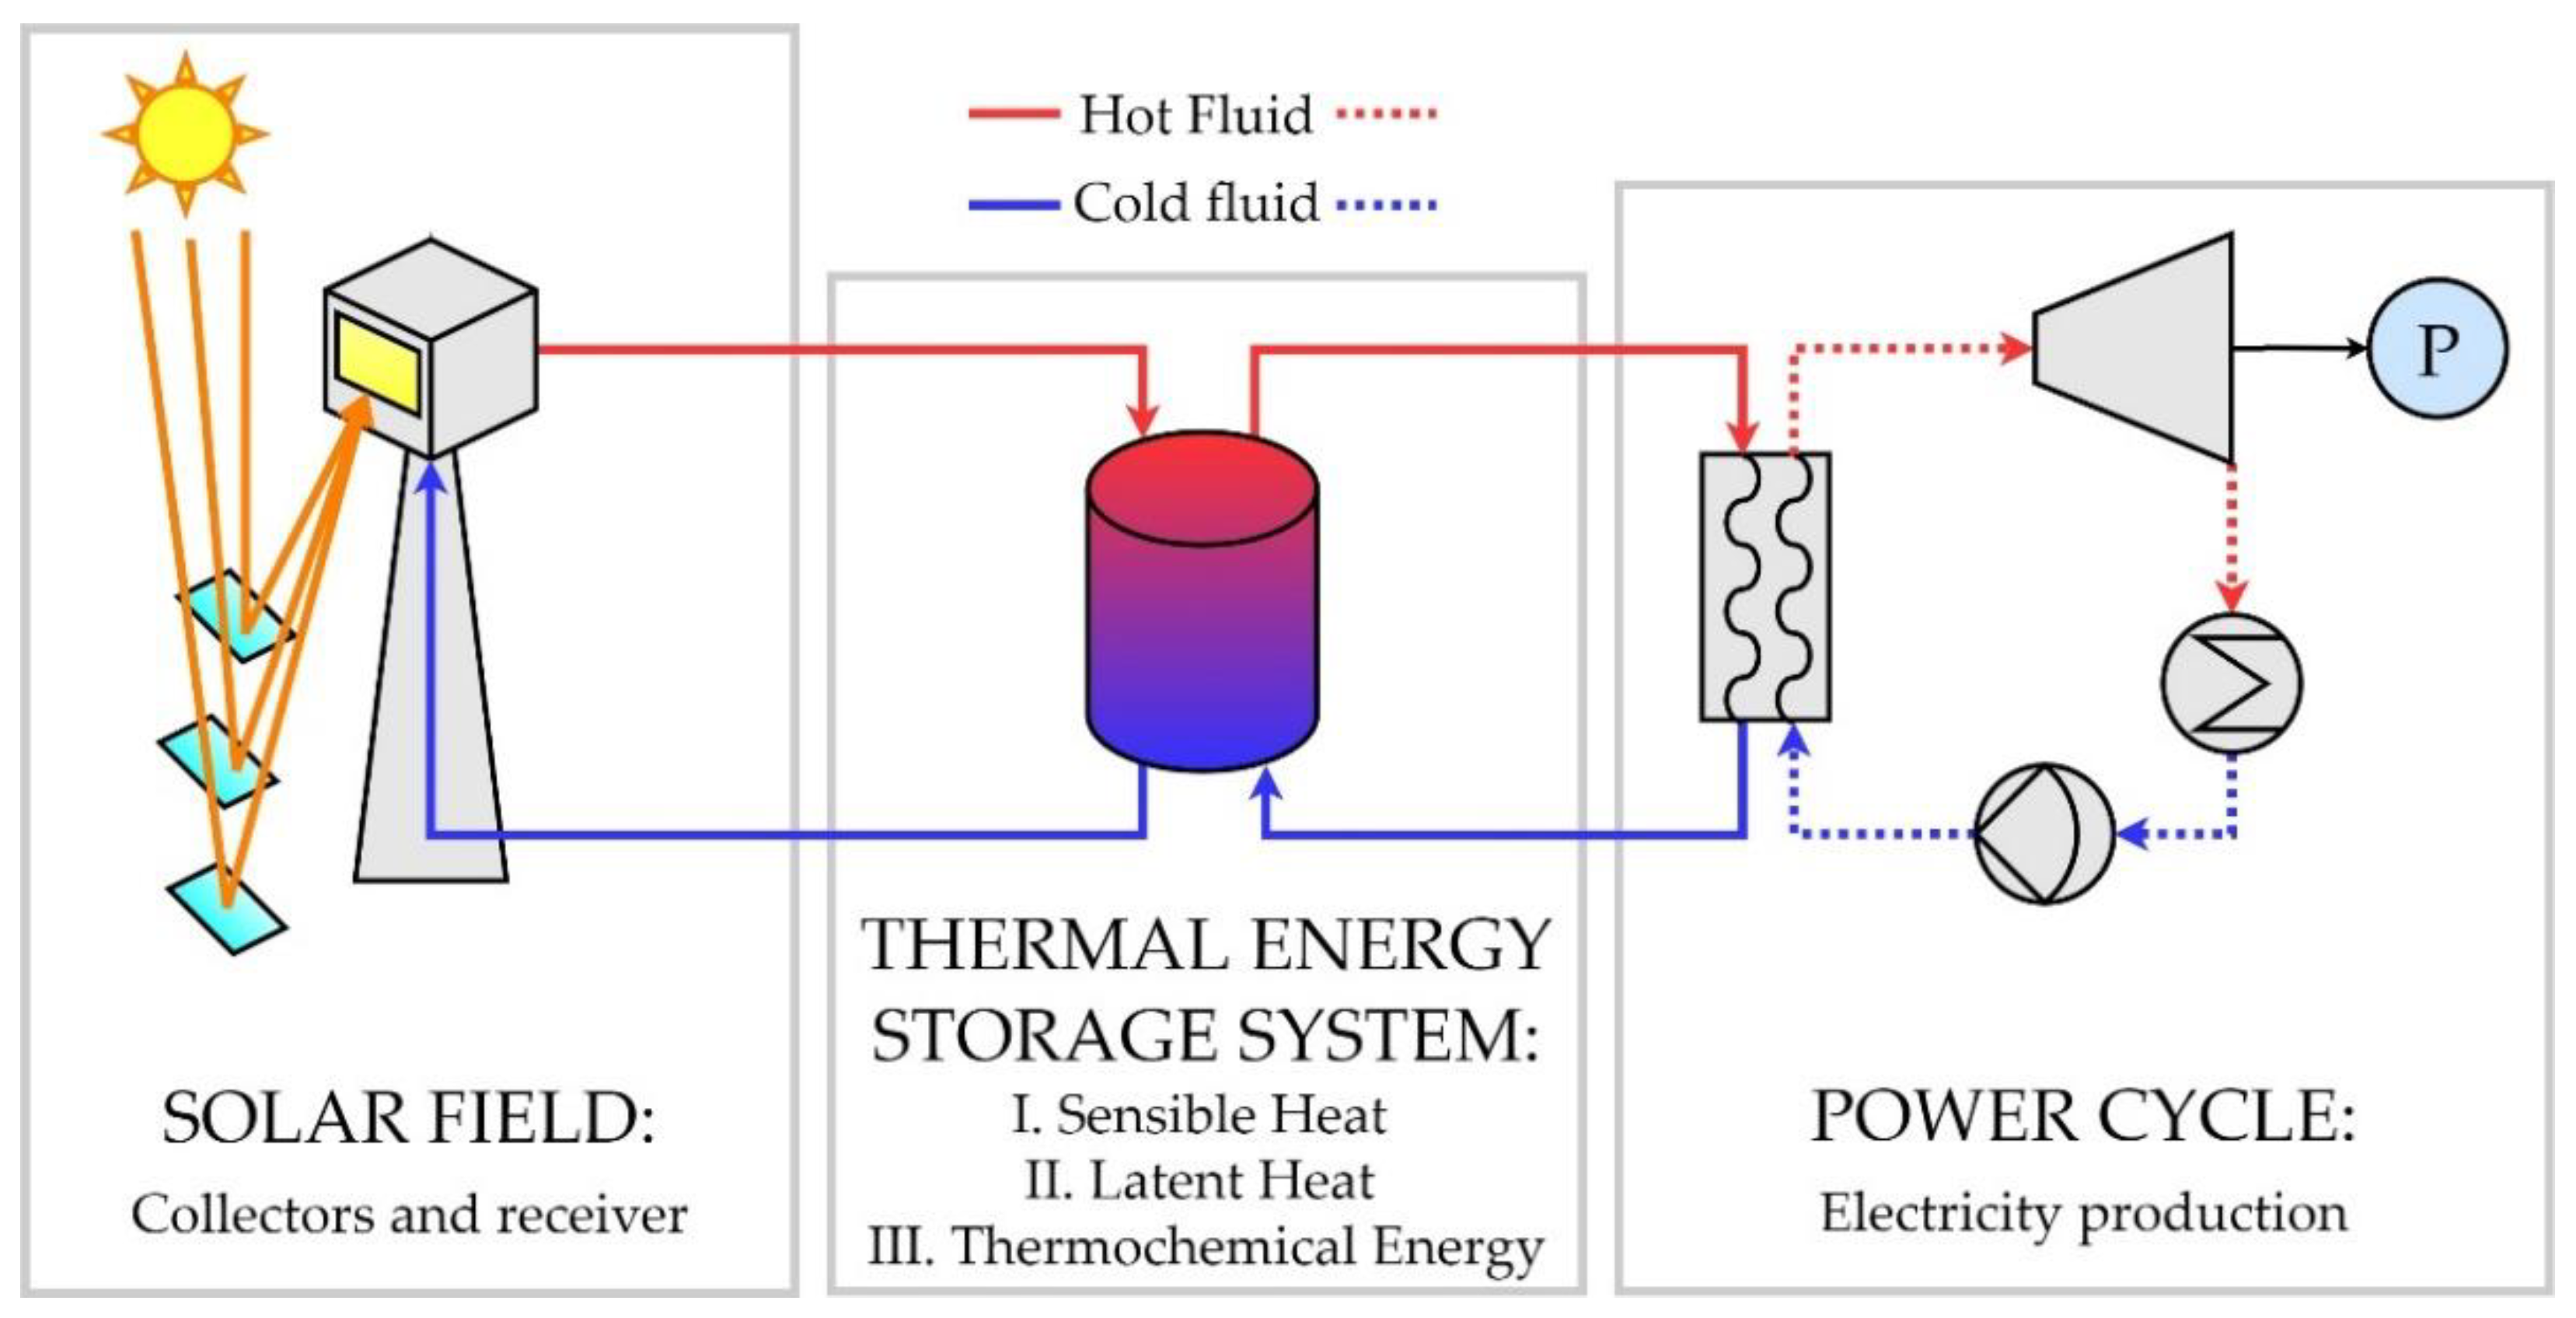 How solar thermal energy storage works with concentrated solar